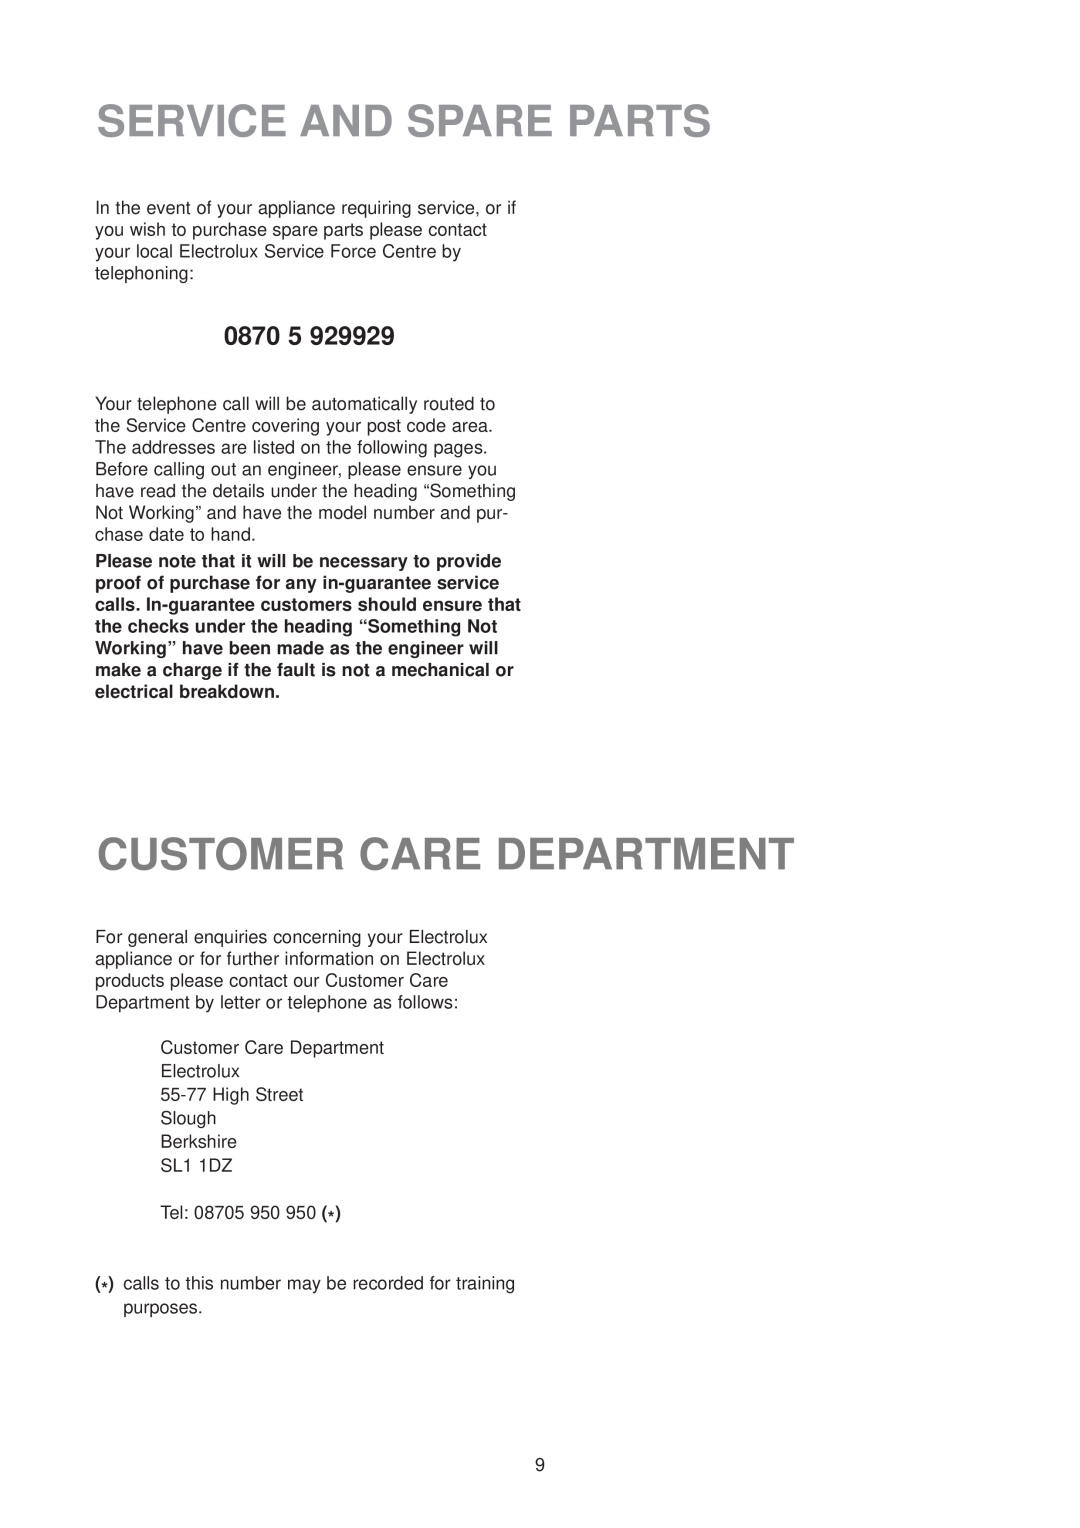 Electrolux ER 6436 manual Service And Spare Parts, Customer Care Department 